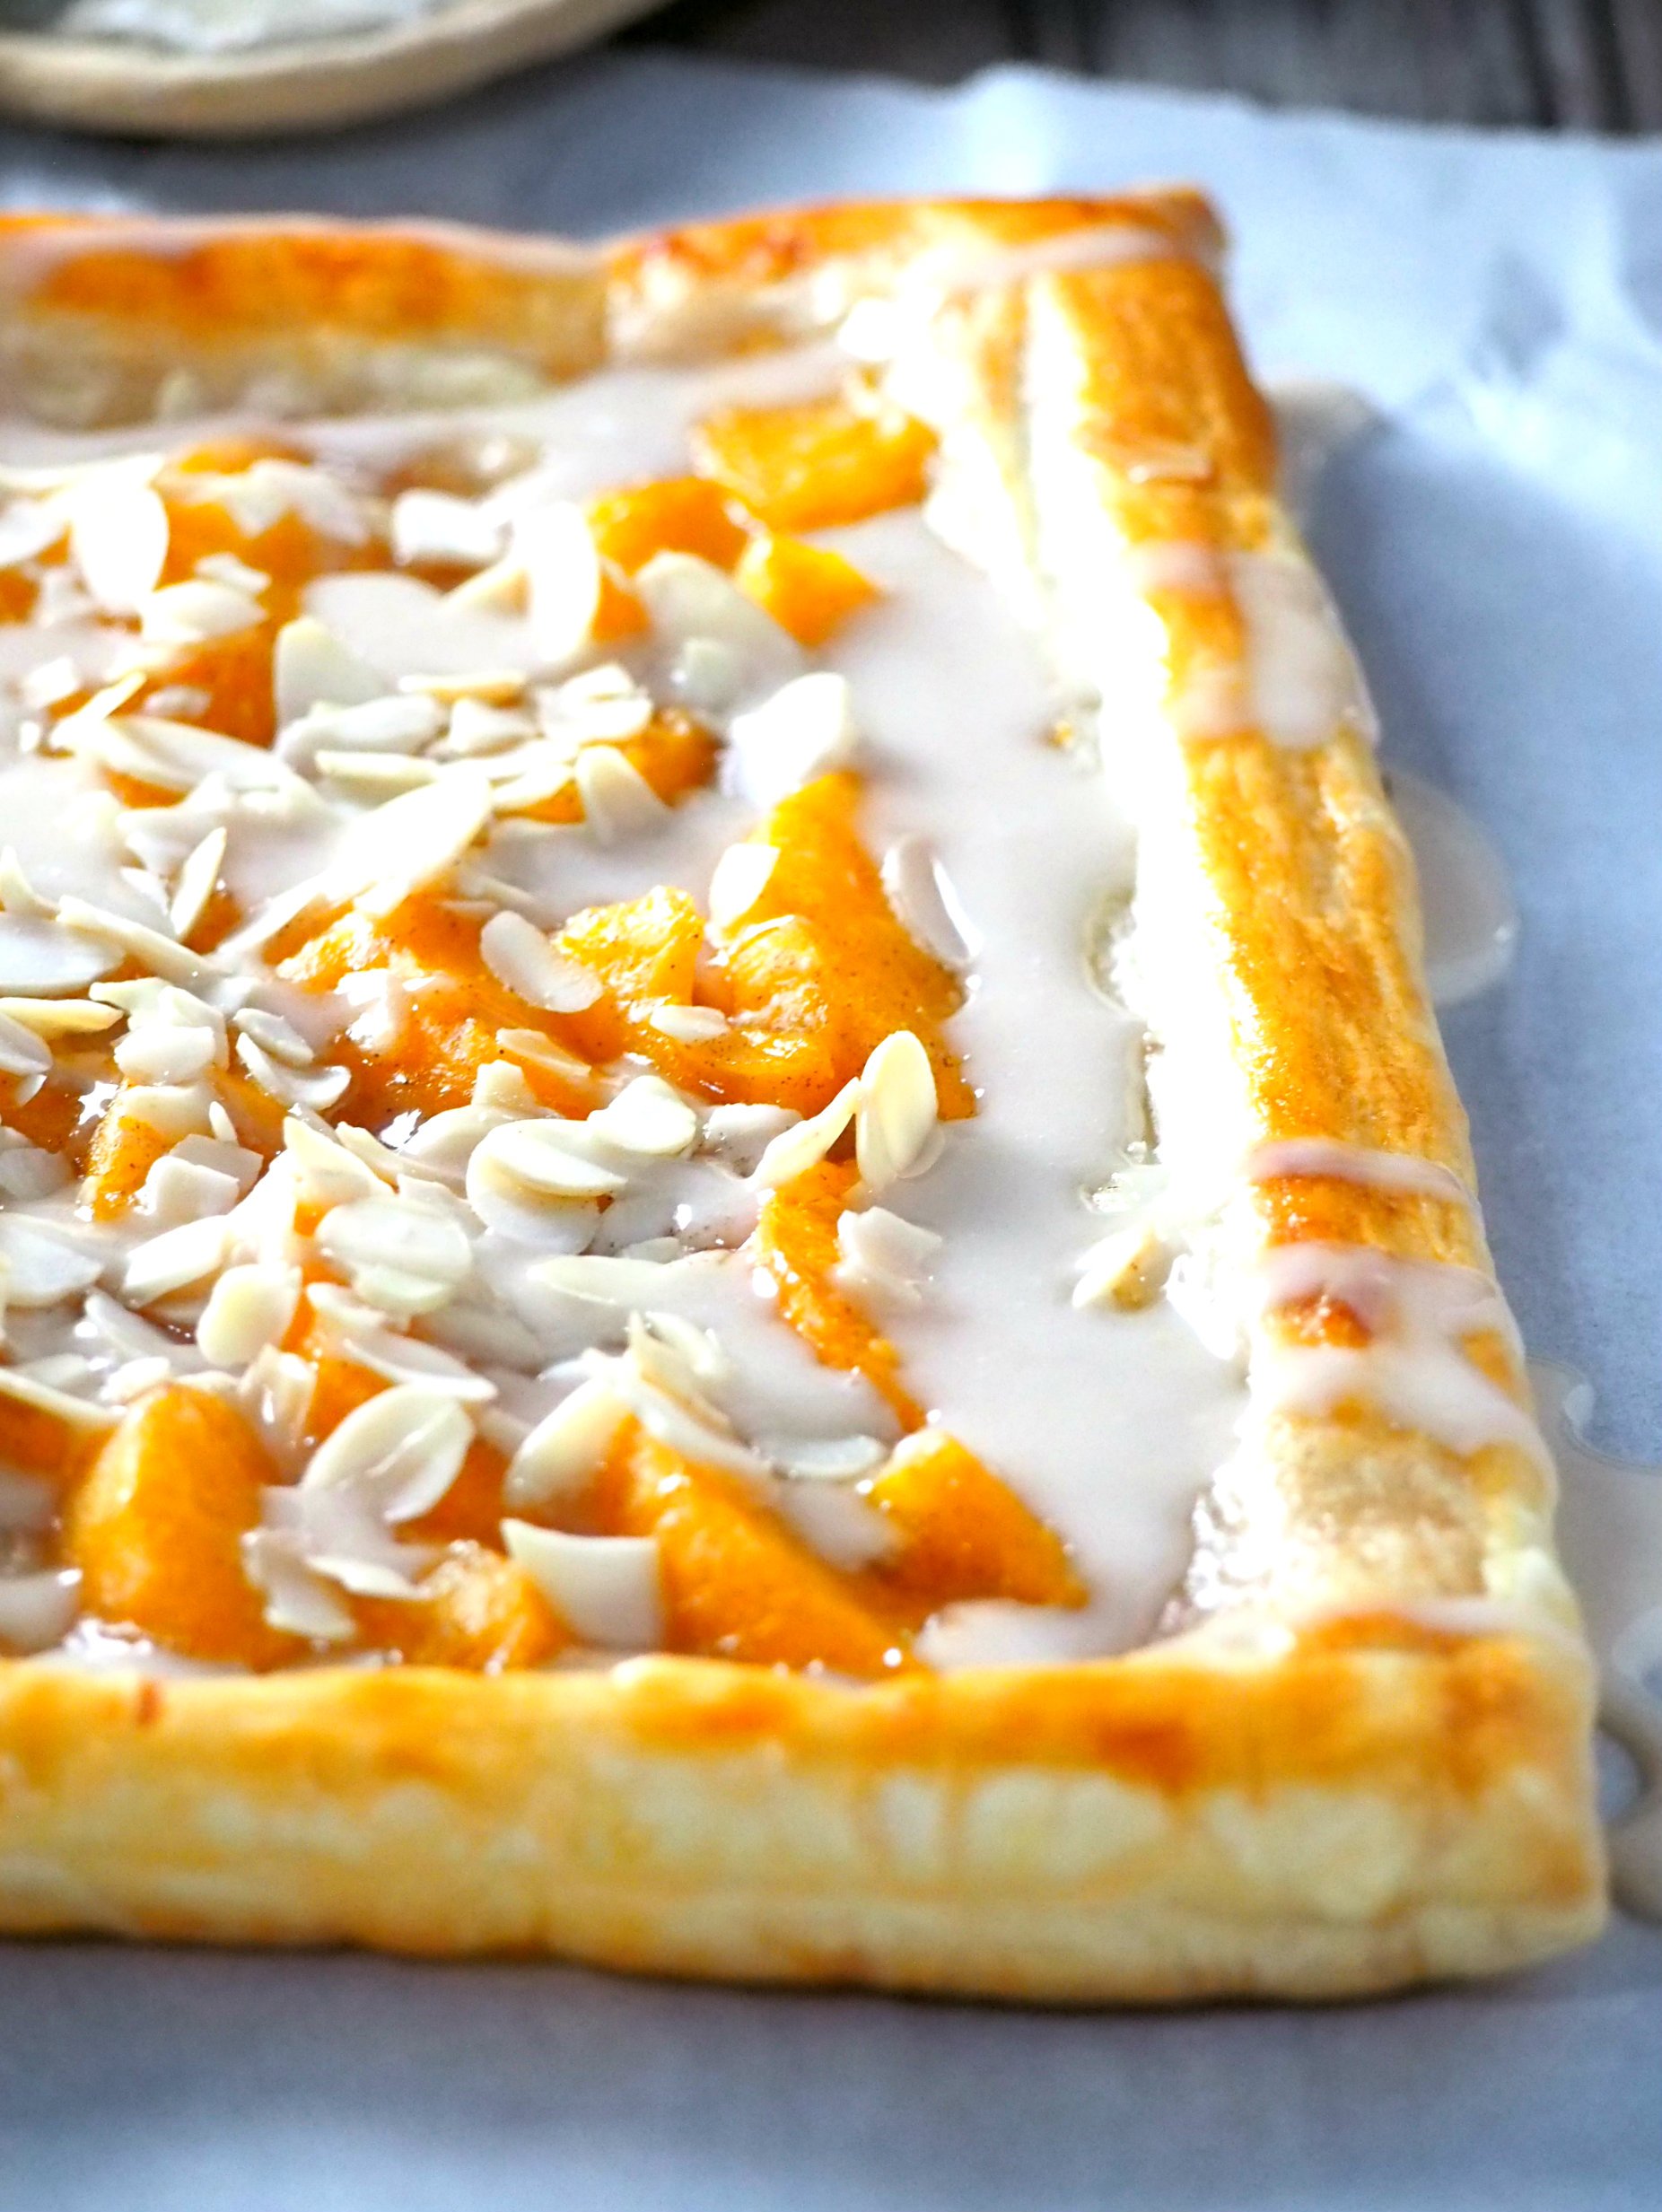 A simple but delicious dessert, you can make this Peach tart in no time and still yield an elegant and delicious pastry. Add this easy peach dessert to your list of quick dessert recipes and you are sure to make this over and over again.